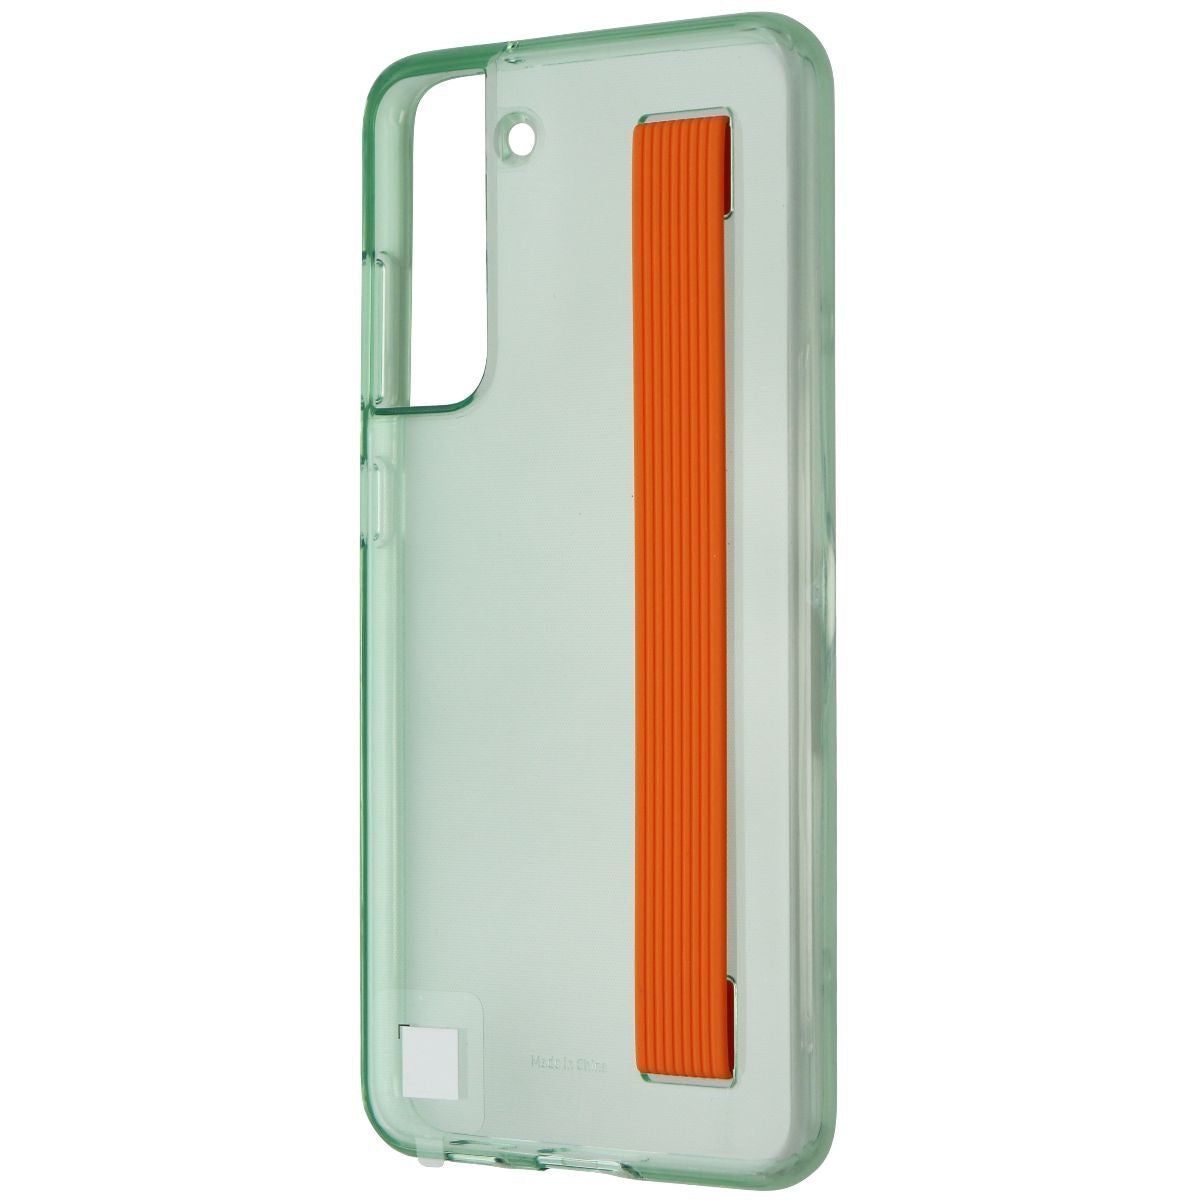 Samsung Slim Strap Cover Case for Galaxy S21 FE (5G) - Clear/Green/Olive/Orange Cell Phone - Cases, Covers & Skins Samsung    - Simple Cell Bulk Wholesale Pricing - USA Seller